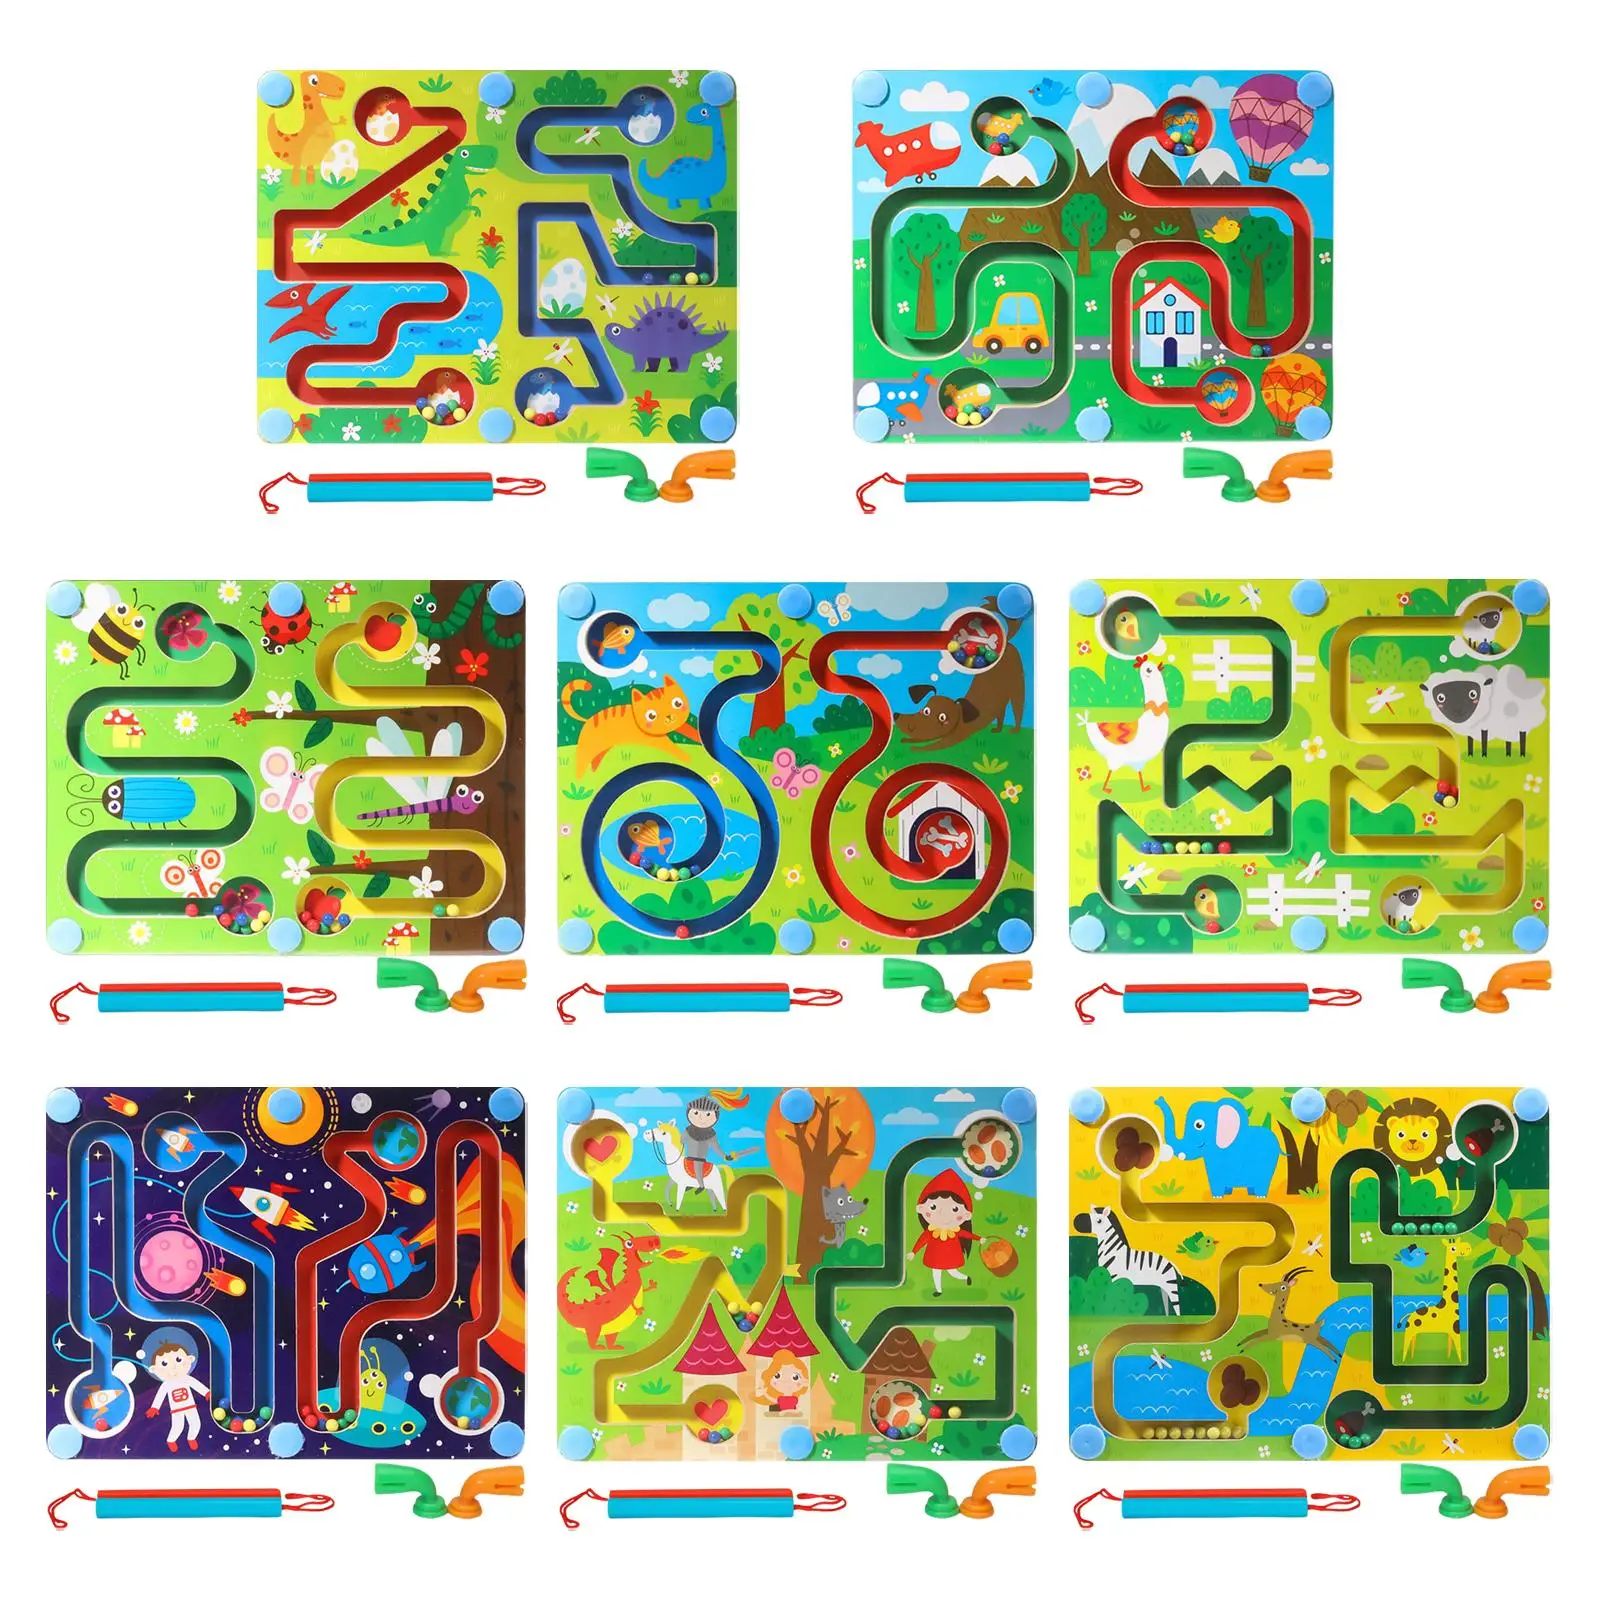 

Balance Board Table Maze Education Brain Teaser Game Labyrinth Learning Puzzle Toys 3D Magic Maze Puzzle for Children Kids Boy